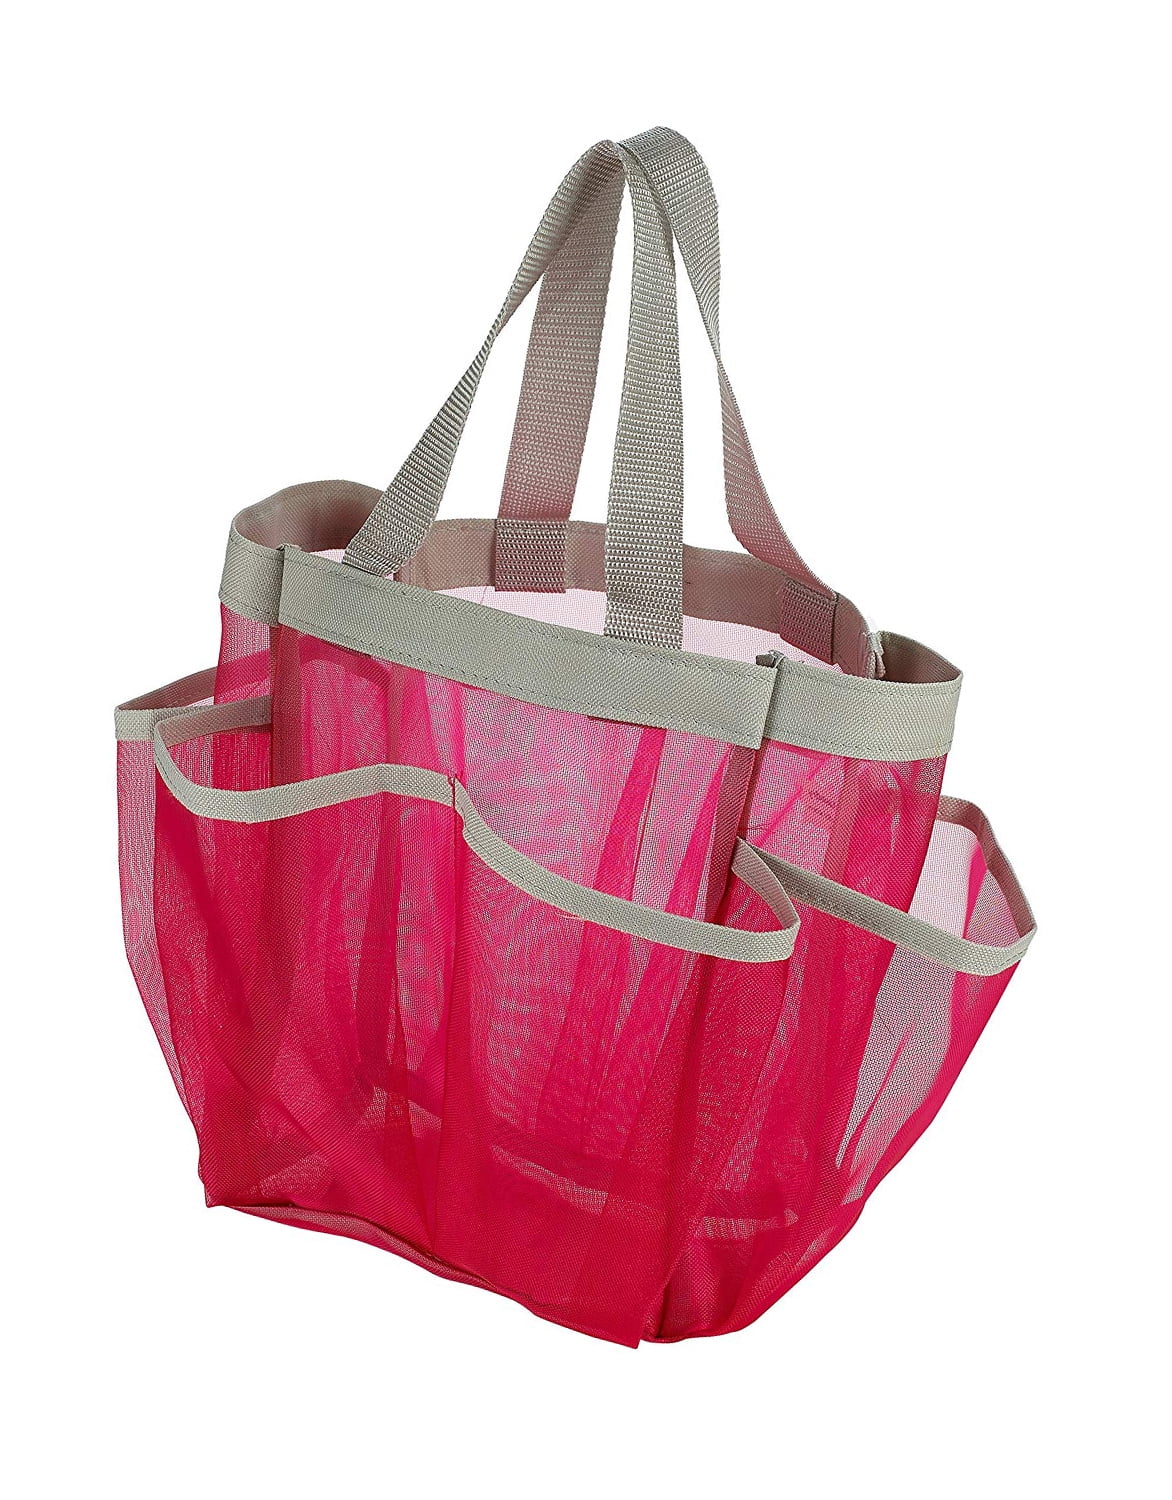 Details about   Portable Shower Caddy Tote Bag Waterproof Plastic Bathroom Caddy Organizer Pink 